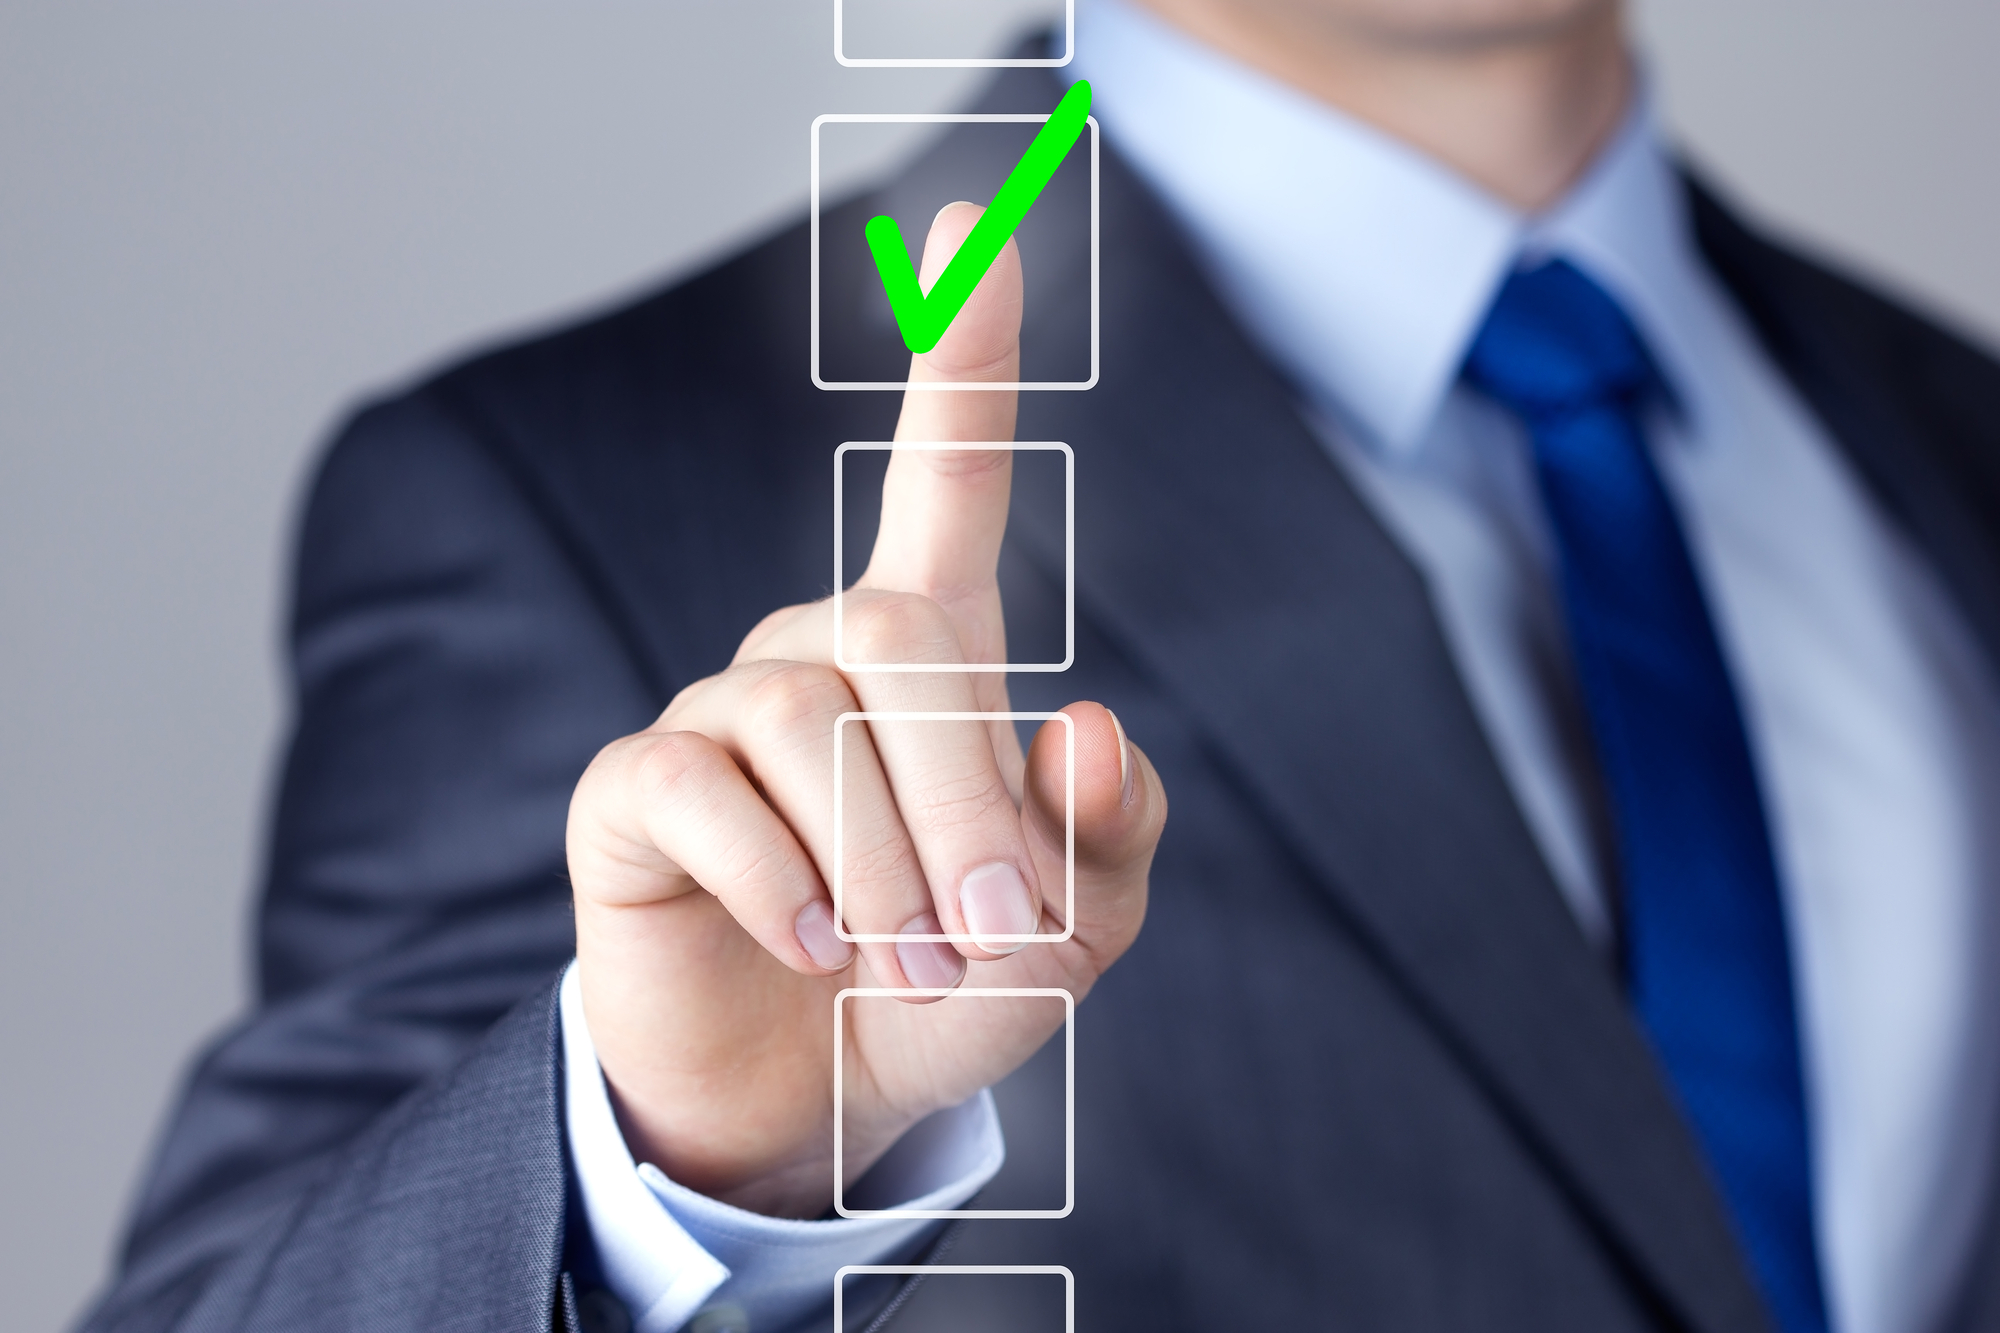 5 Key Considerations for Selecting a Managed Service Provider